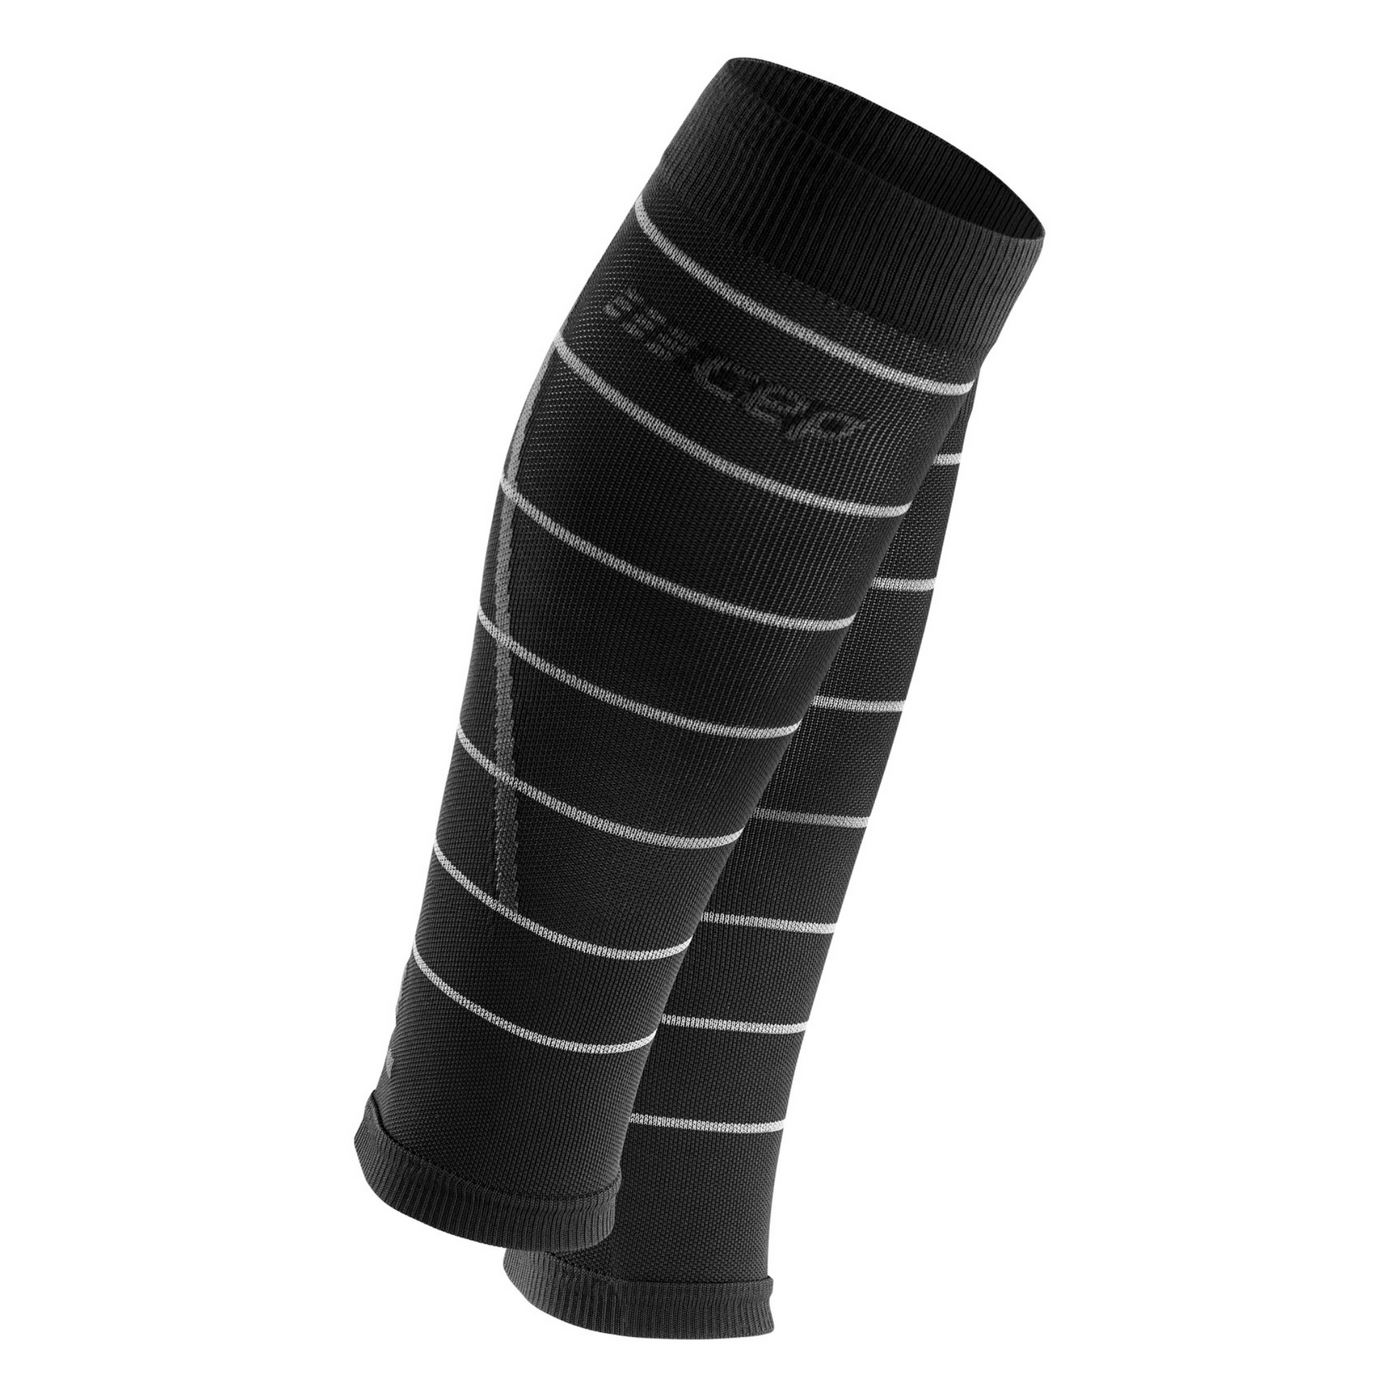 Reflective Compression Calf Sleeves, Men, Black/Silver, Front View